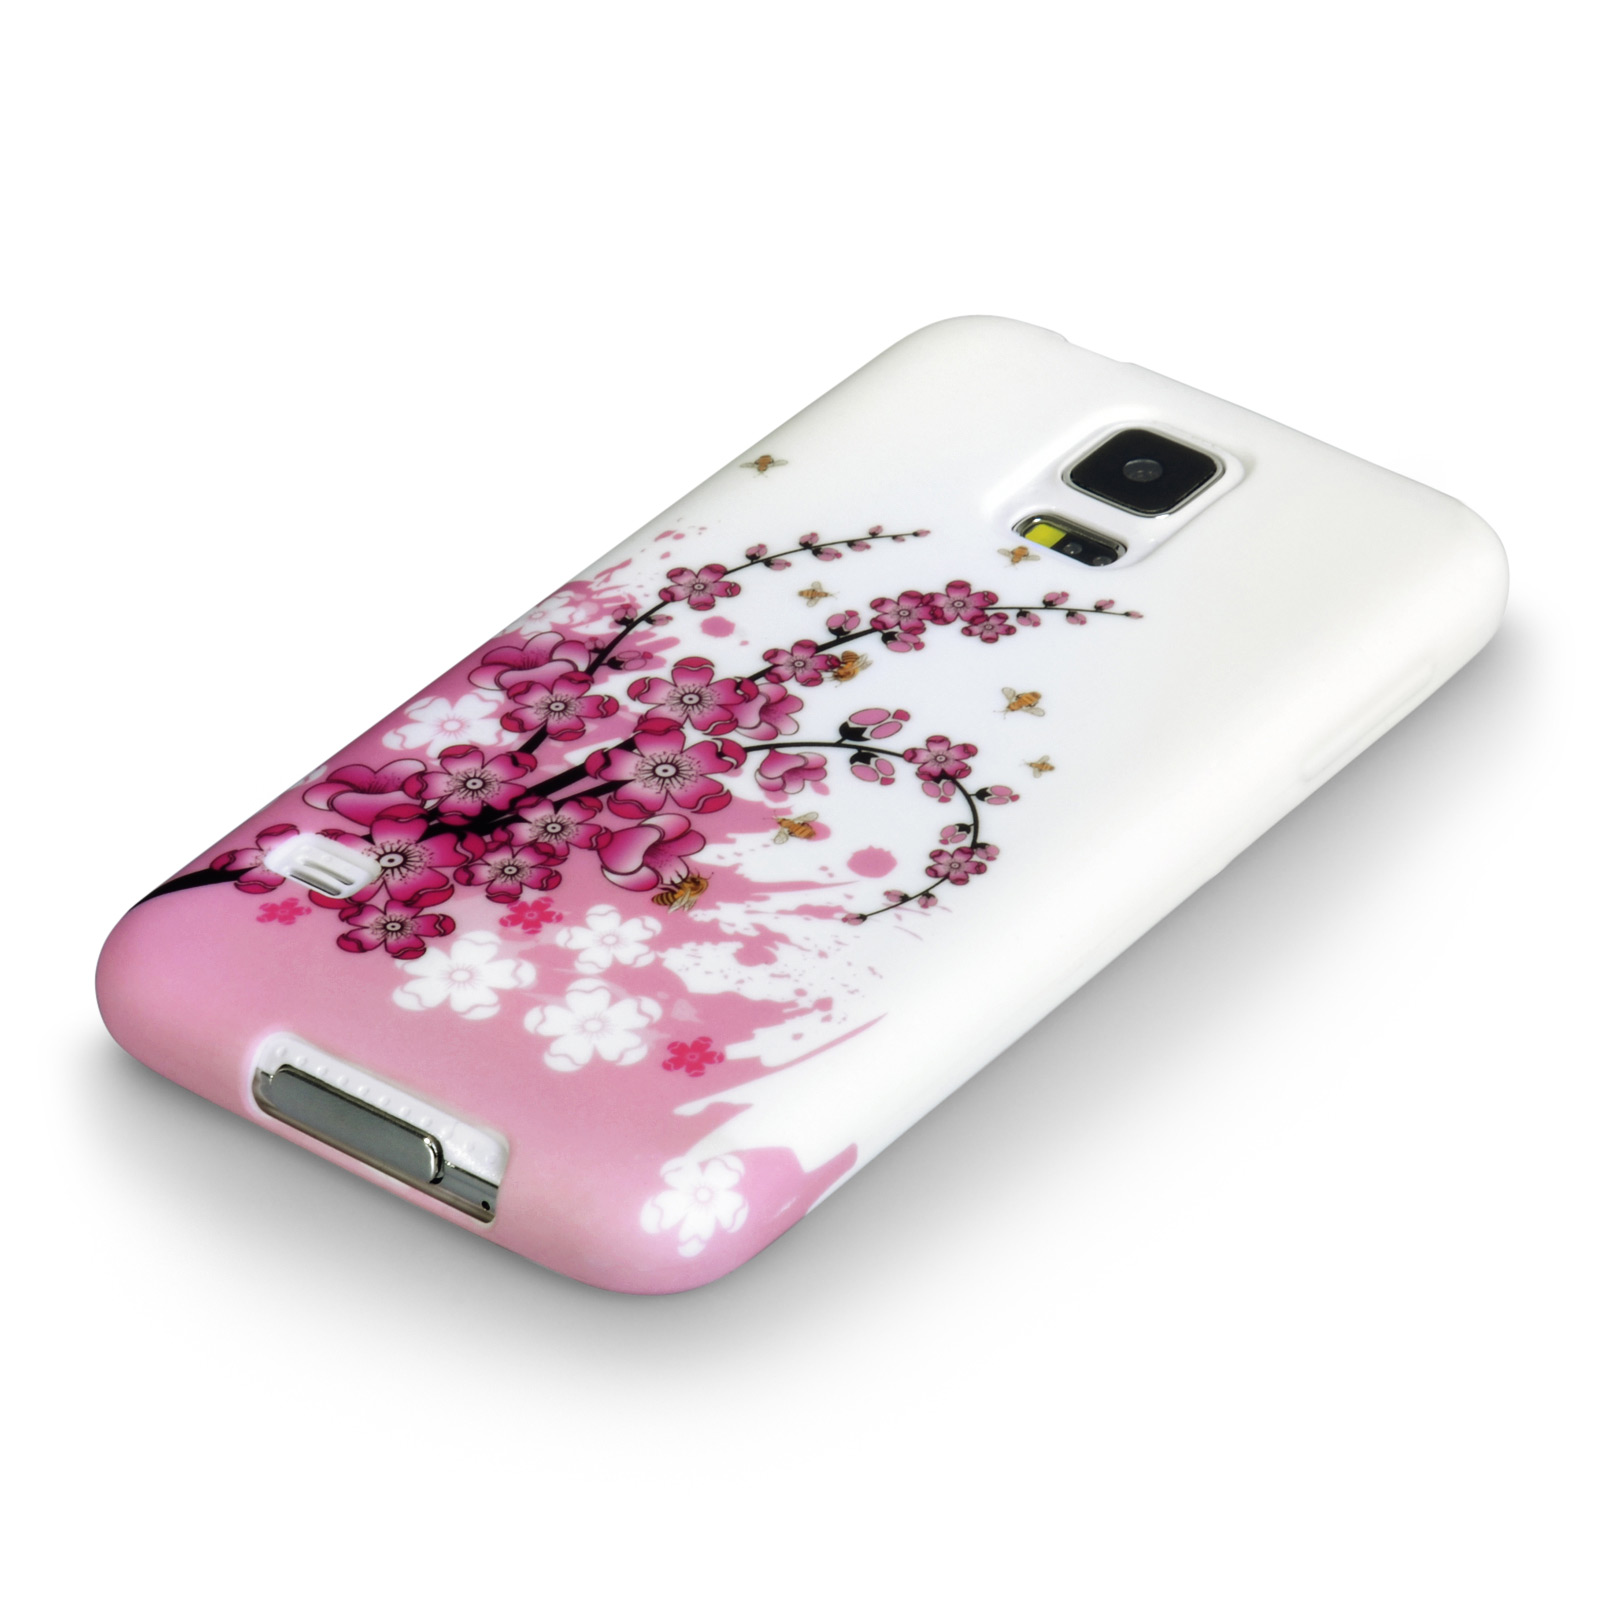 YouSave Accessories Samsung Galaxy S5 Floral Bee Silicone Gel Case